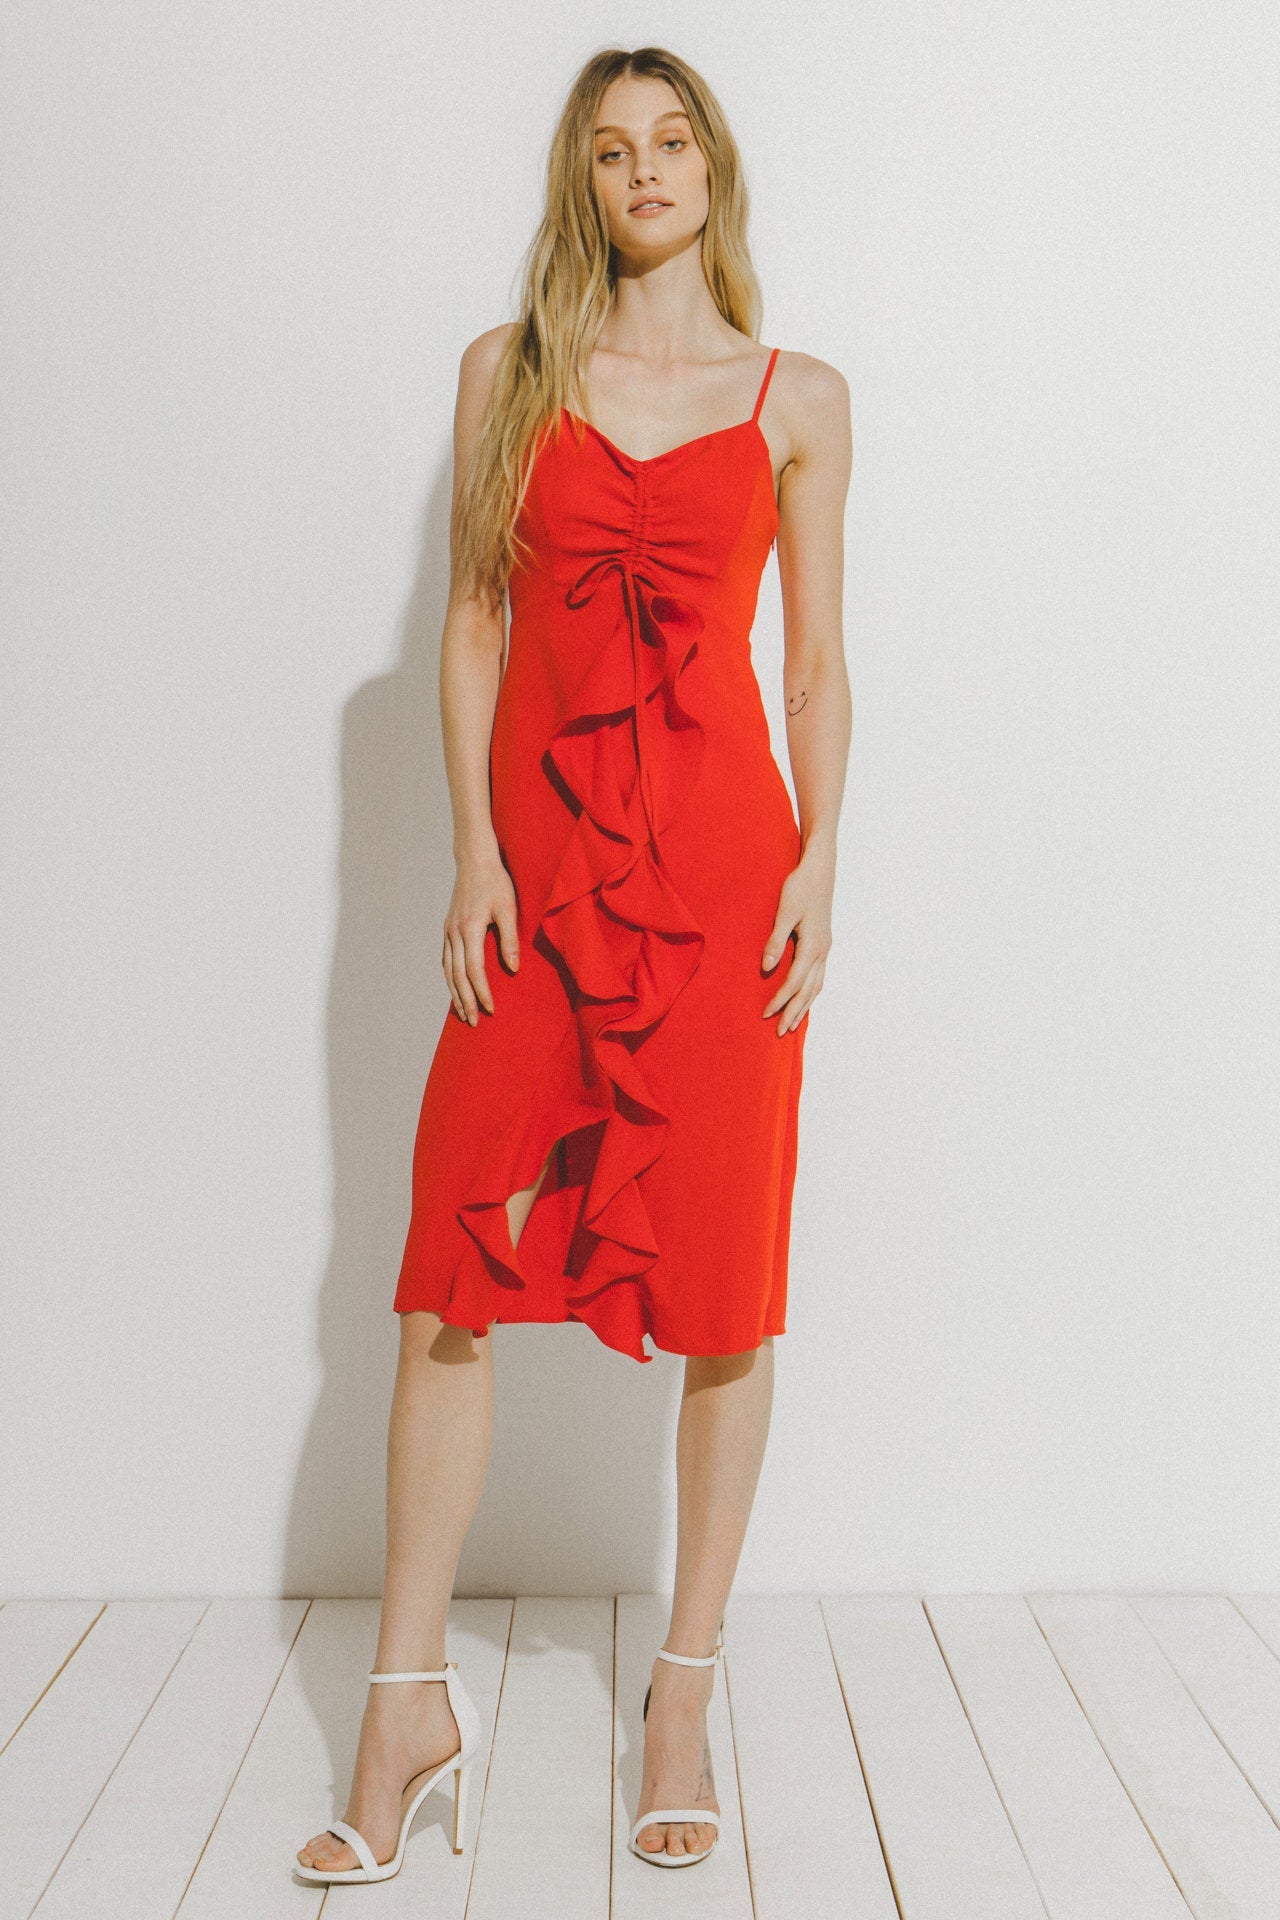 ENDLESS ROSE - Cascading Ruffle Dress - DRESSES available at Objectrare